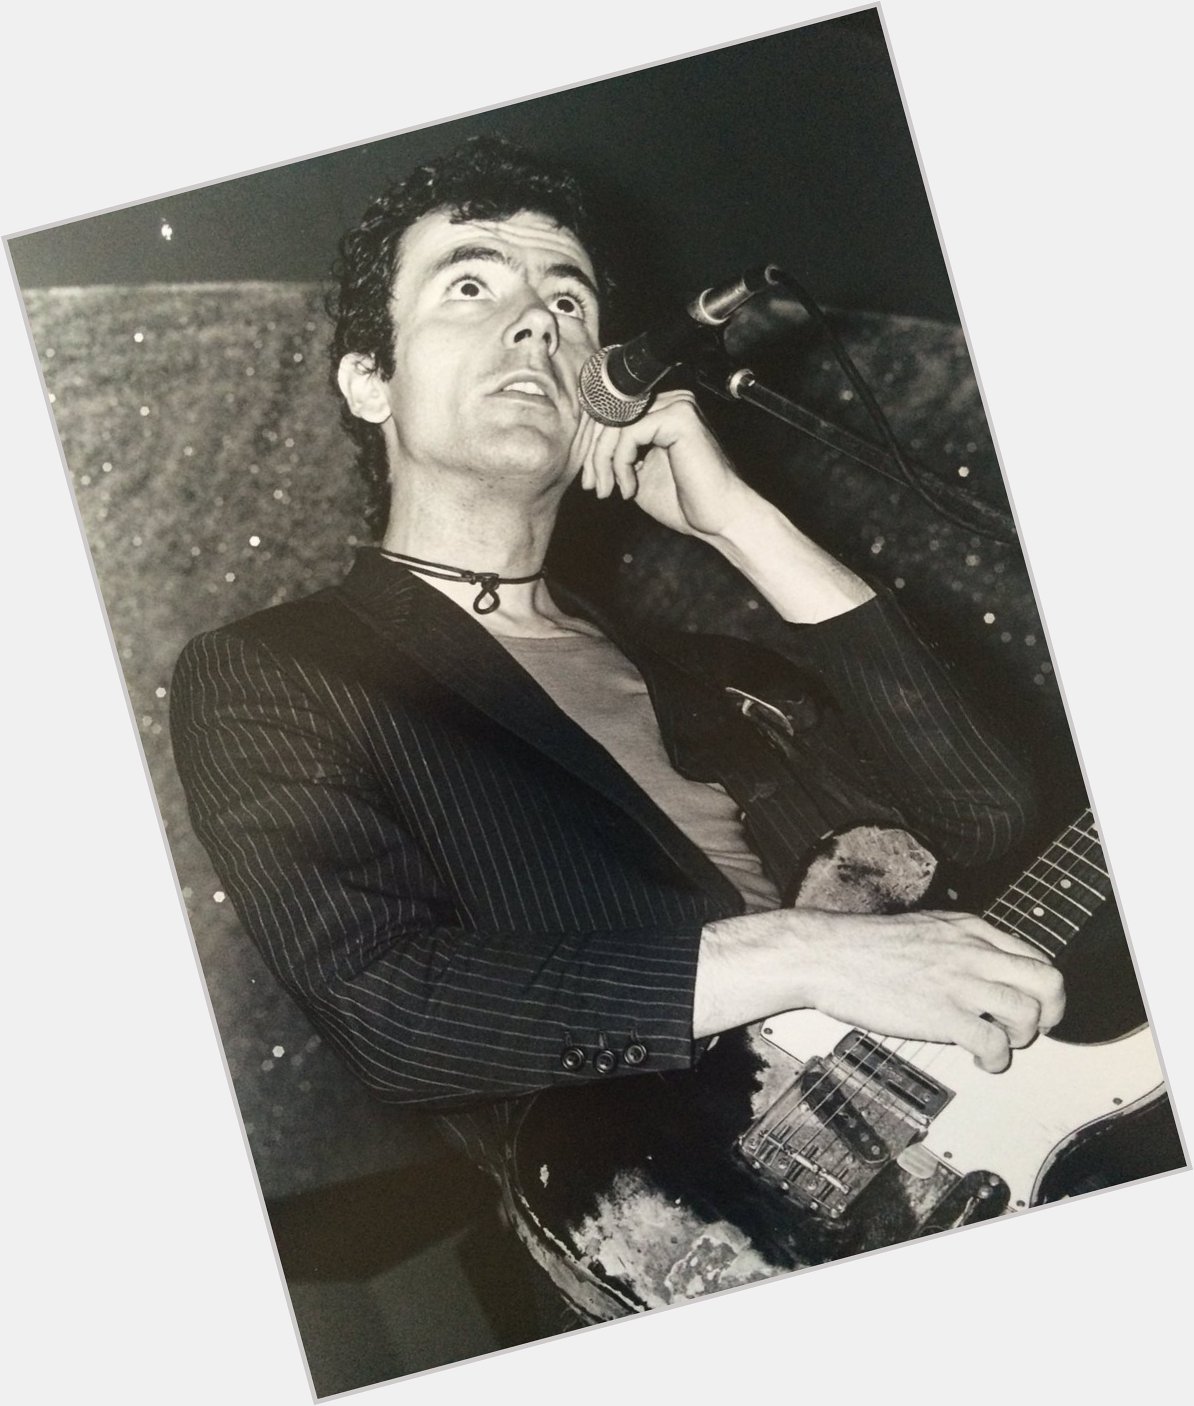 40 years since \77 Hugh Cornwell celebrated his 28th birthday on this day in 1977. Many happy returns Hugh... 